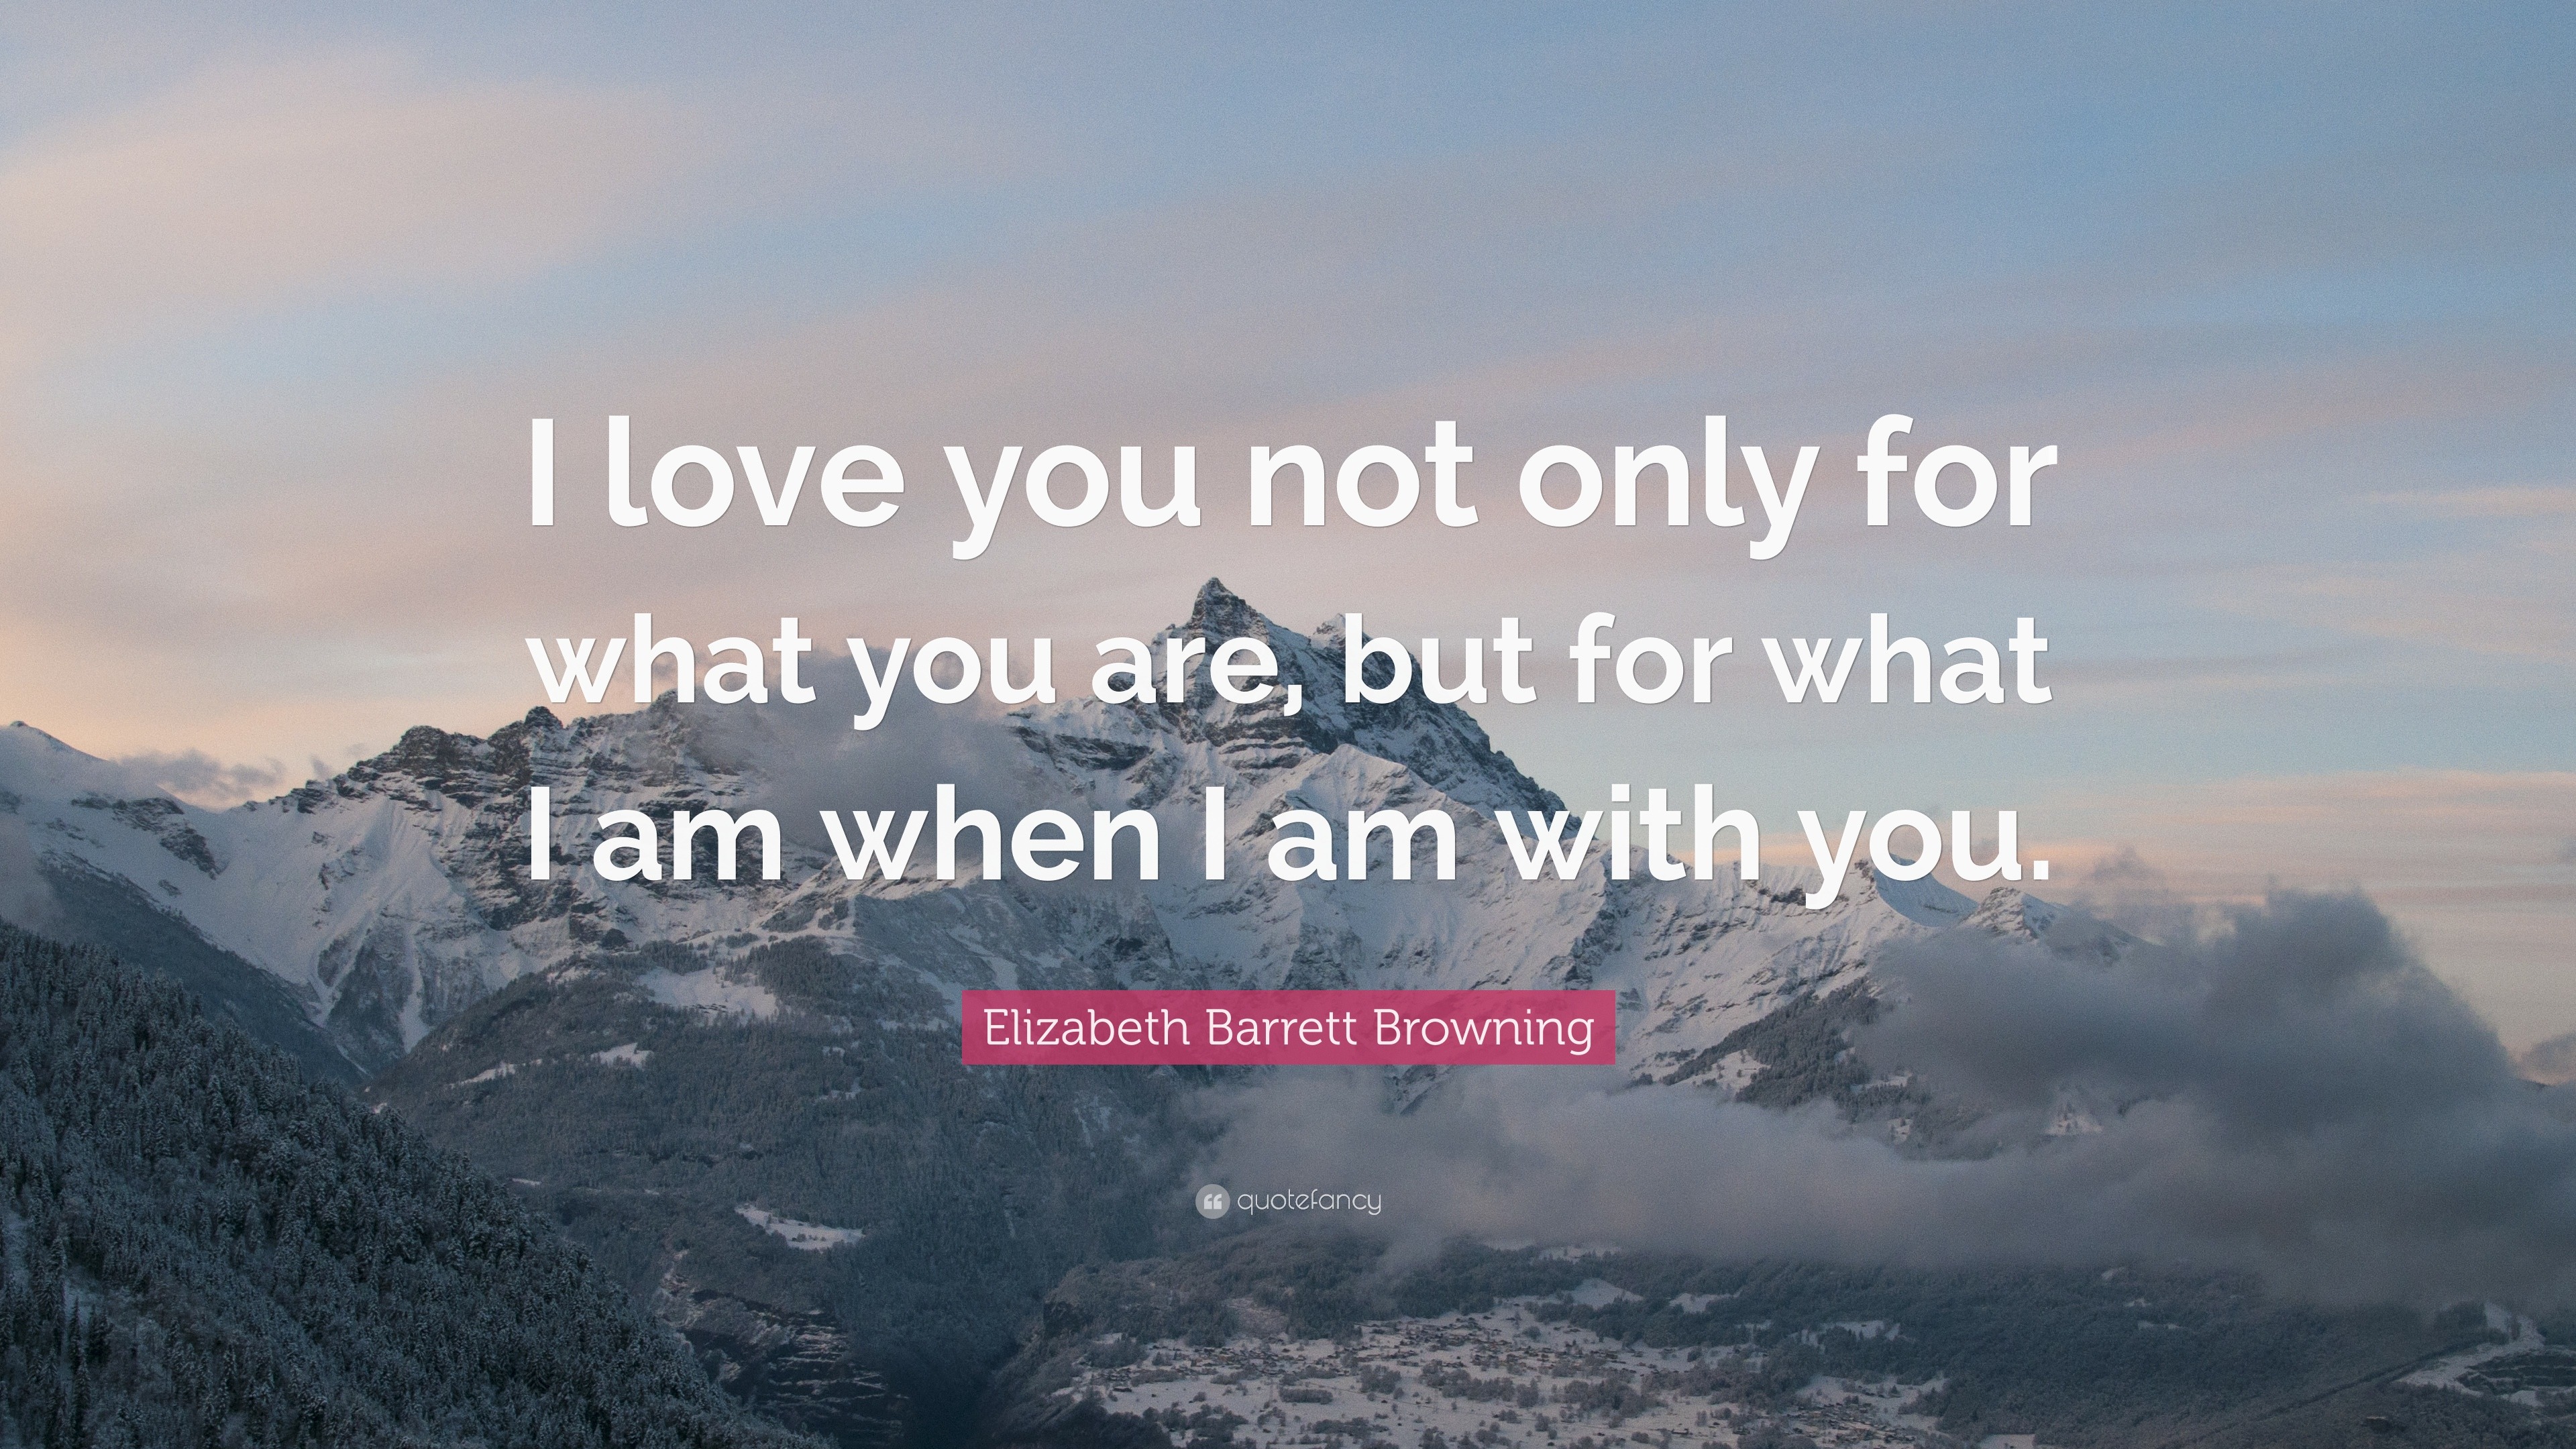 Elizabeth Barrett Browning Quote: “I love you not only for what you are, but for ...